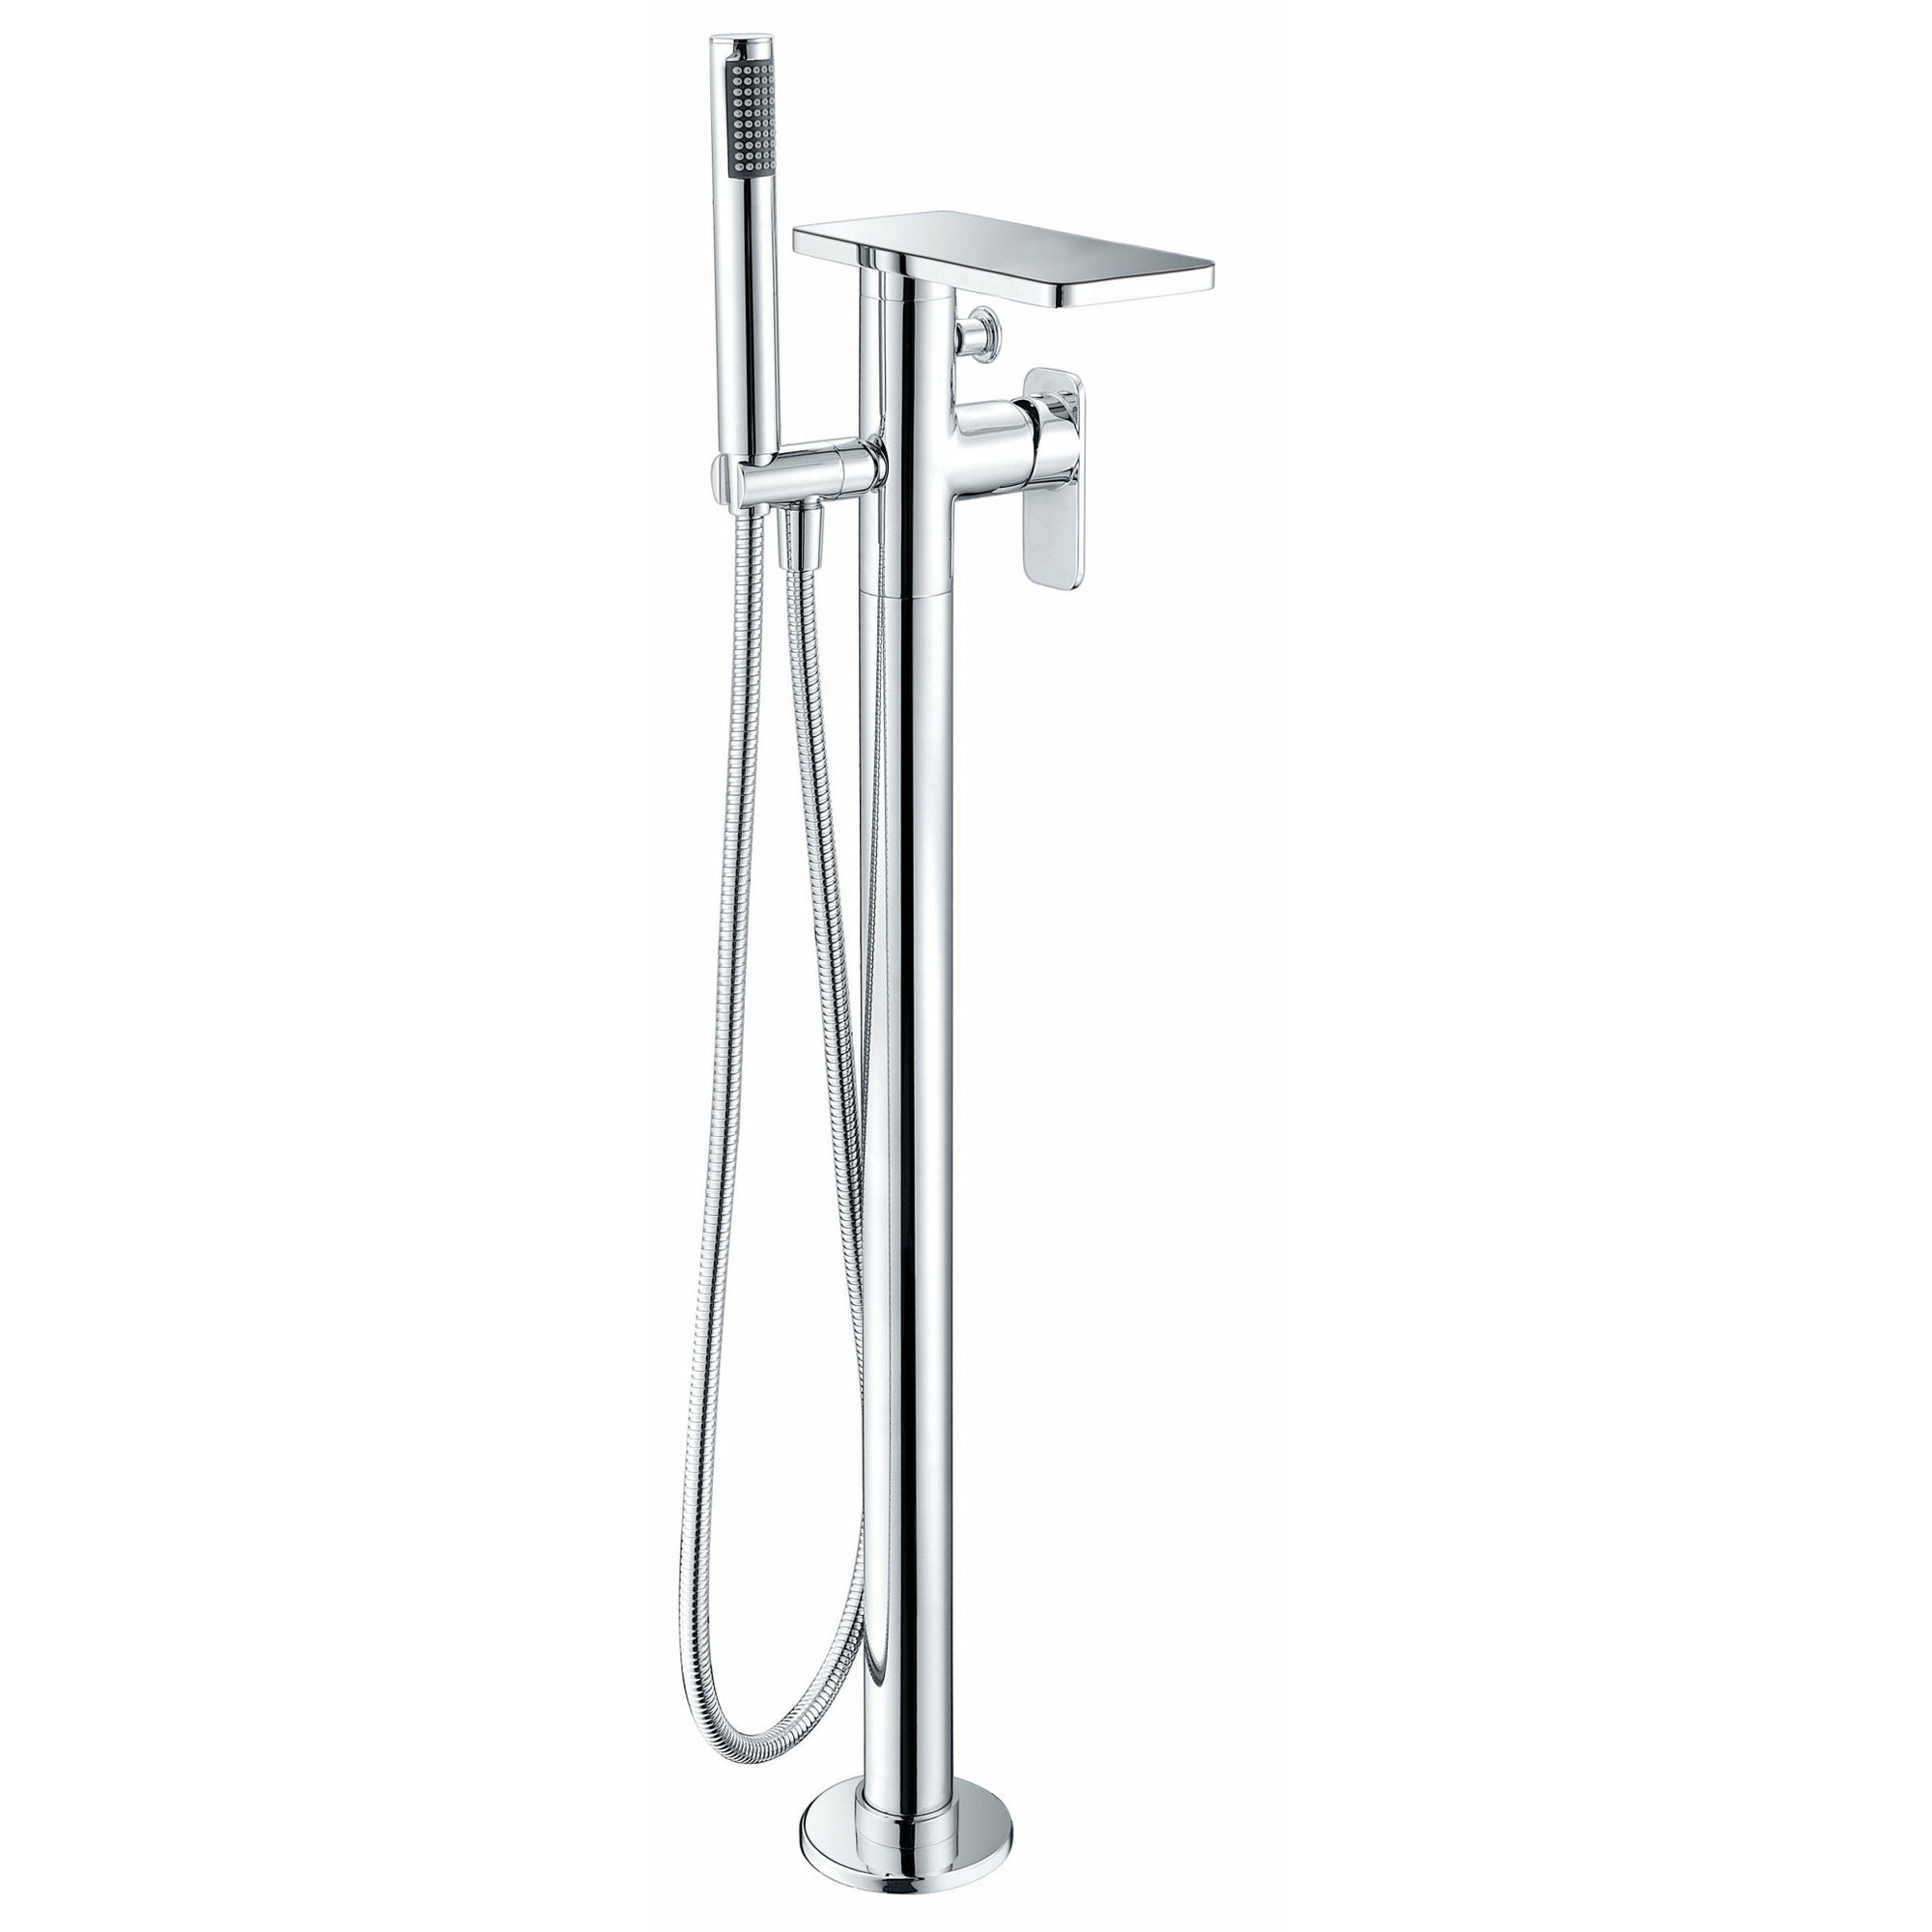 ALFI AB2875 Free Standing Floor Mounted Bath Tub Filler with flat rectangular spout, single lever handle, waterfall water flow, hand-held showerhead brushed nickel in a white background